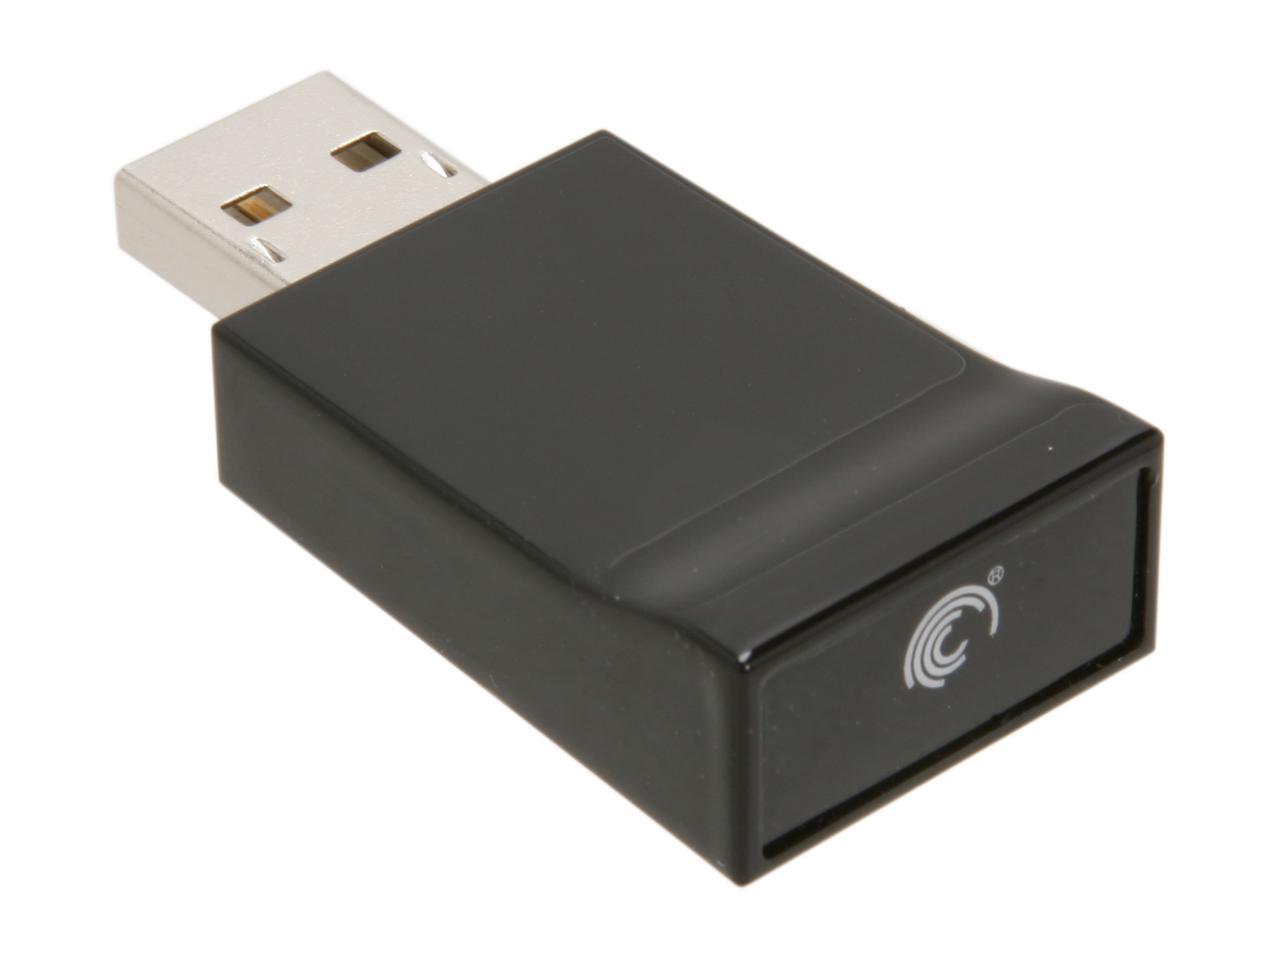 seagate freeagent dockstar network adapter review